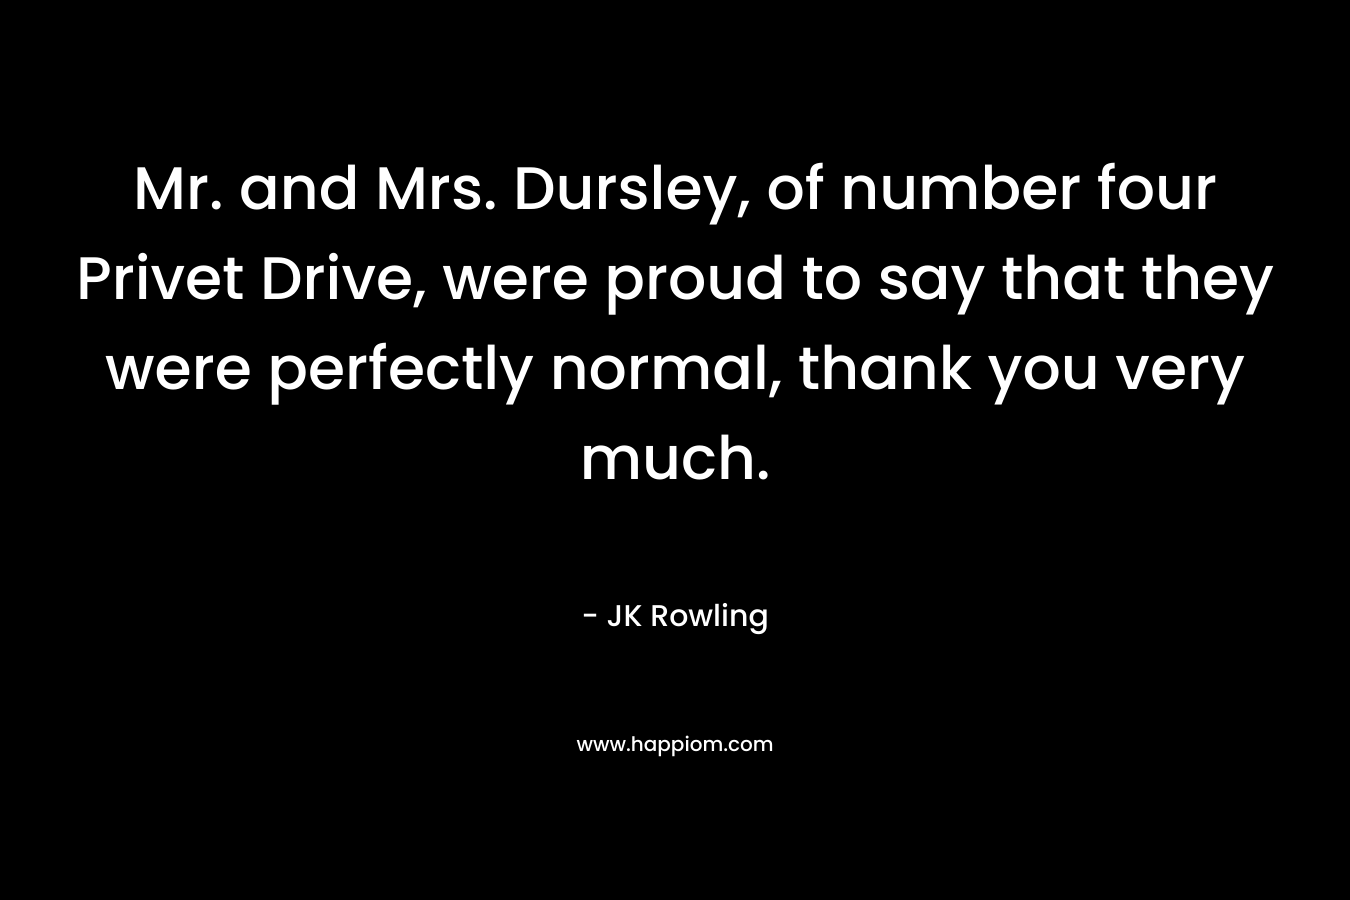 Mr. and Mrs. Dursley, of number four Privet Drive, were proud to say that they were perfectly normal, thank you very much. – JK Rowling